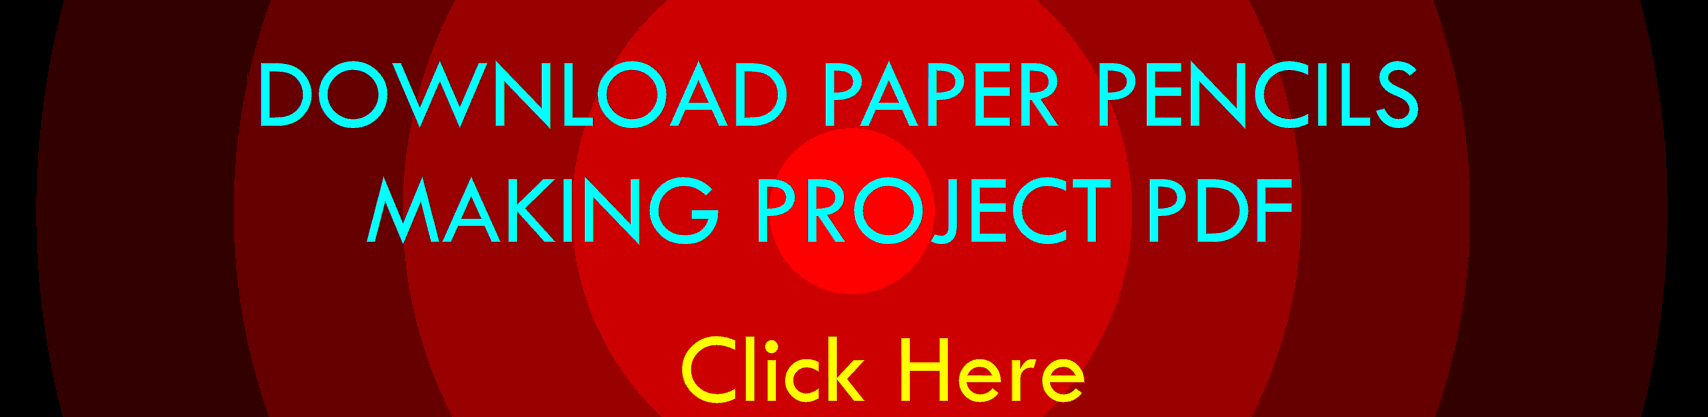 PAPER PENCIL MAKING MACHINE PROJECT DOWNLOAD